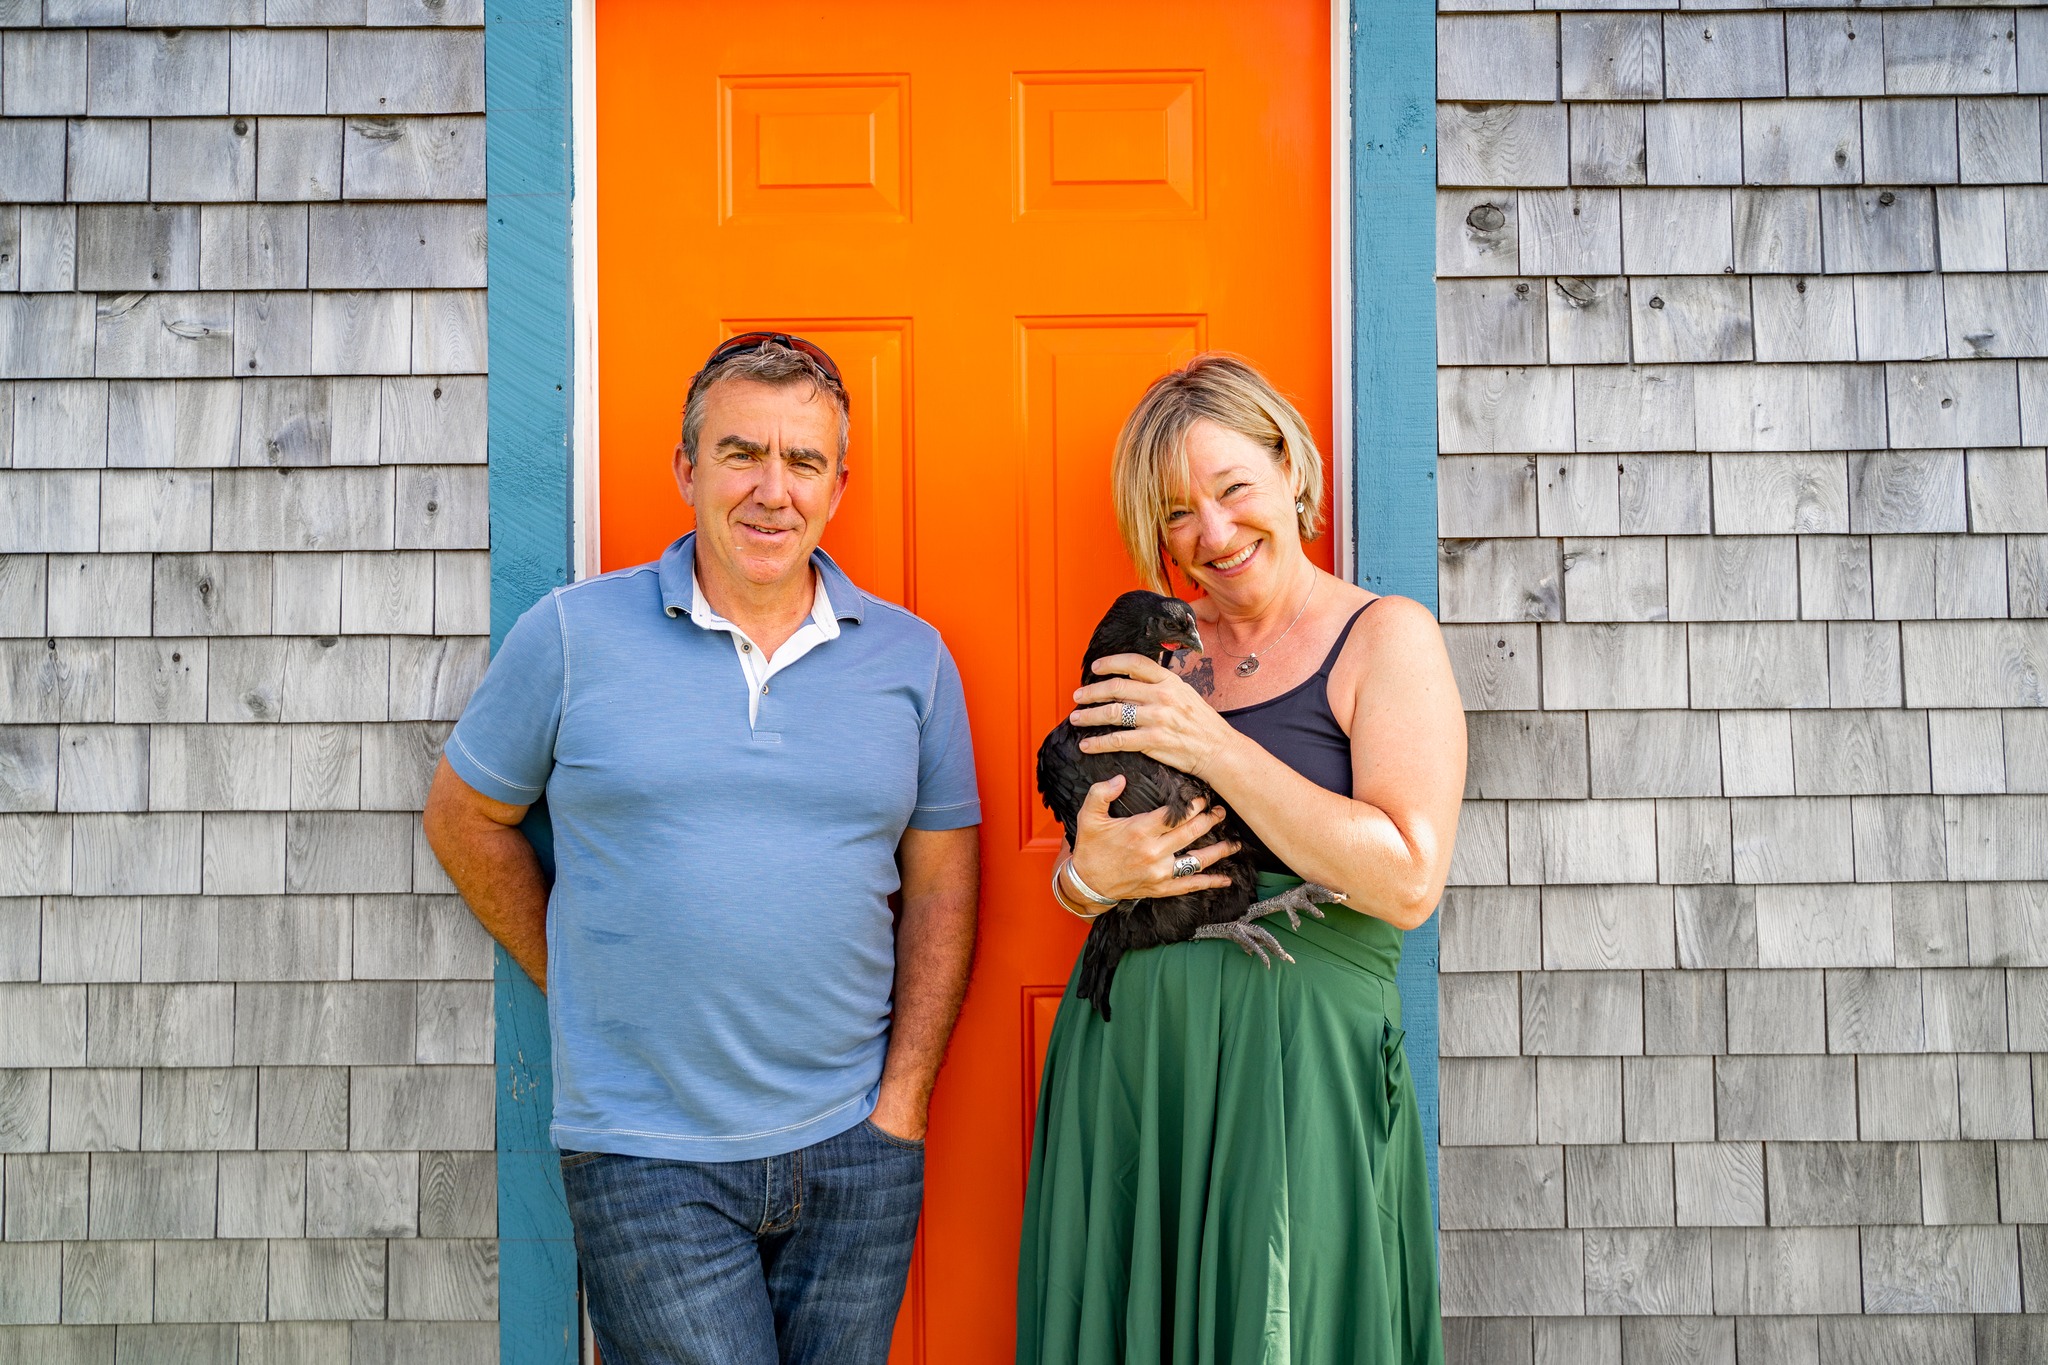 Two people stand in front of a bright orange door. The person on the right is holding a black chicken.